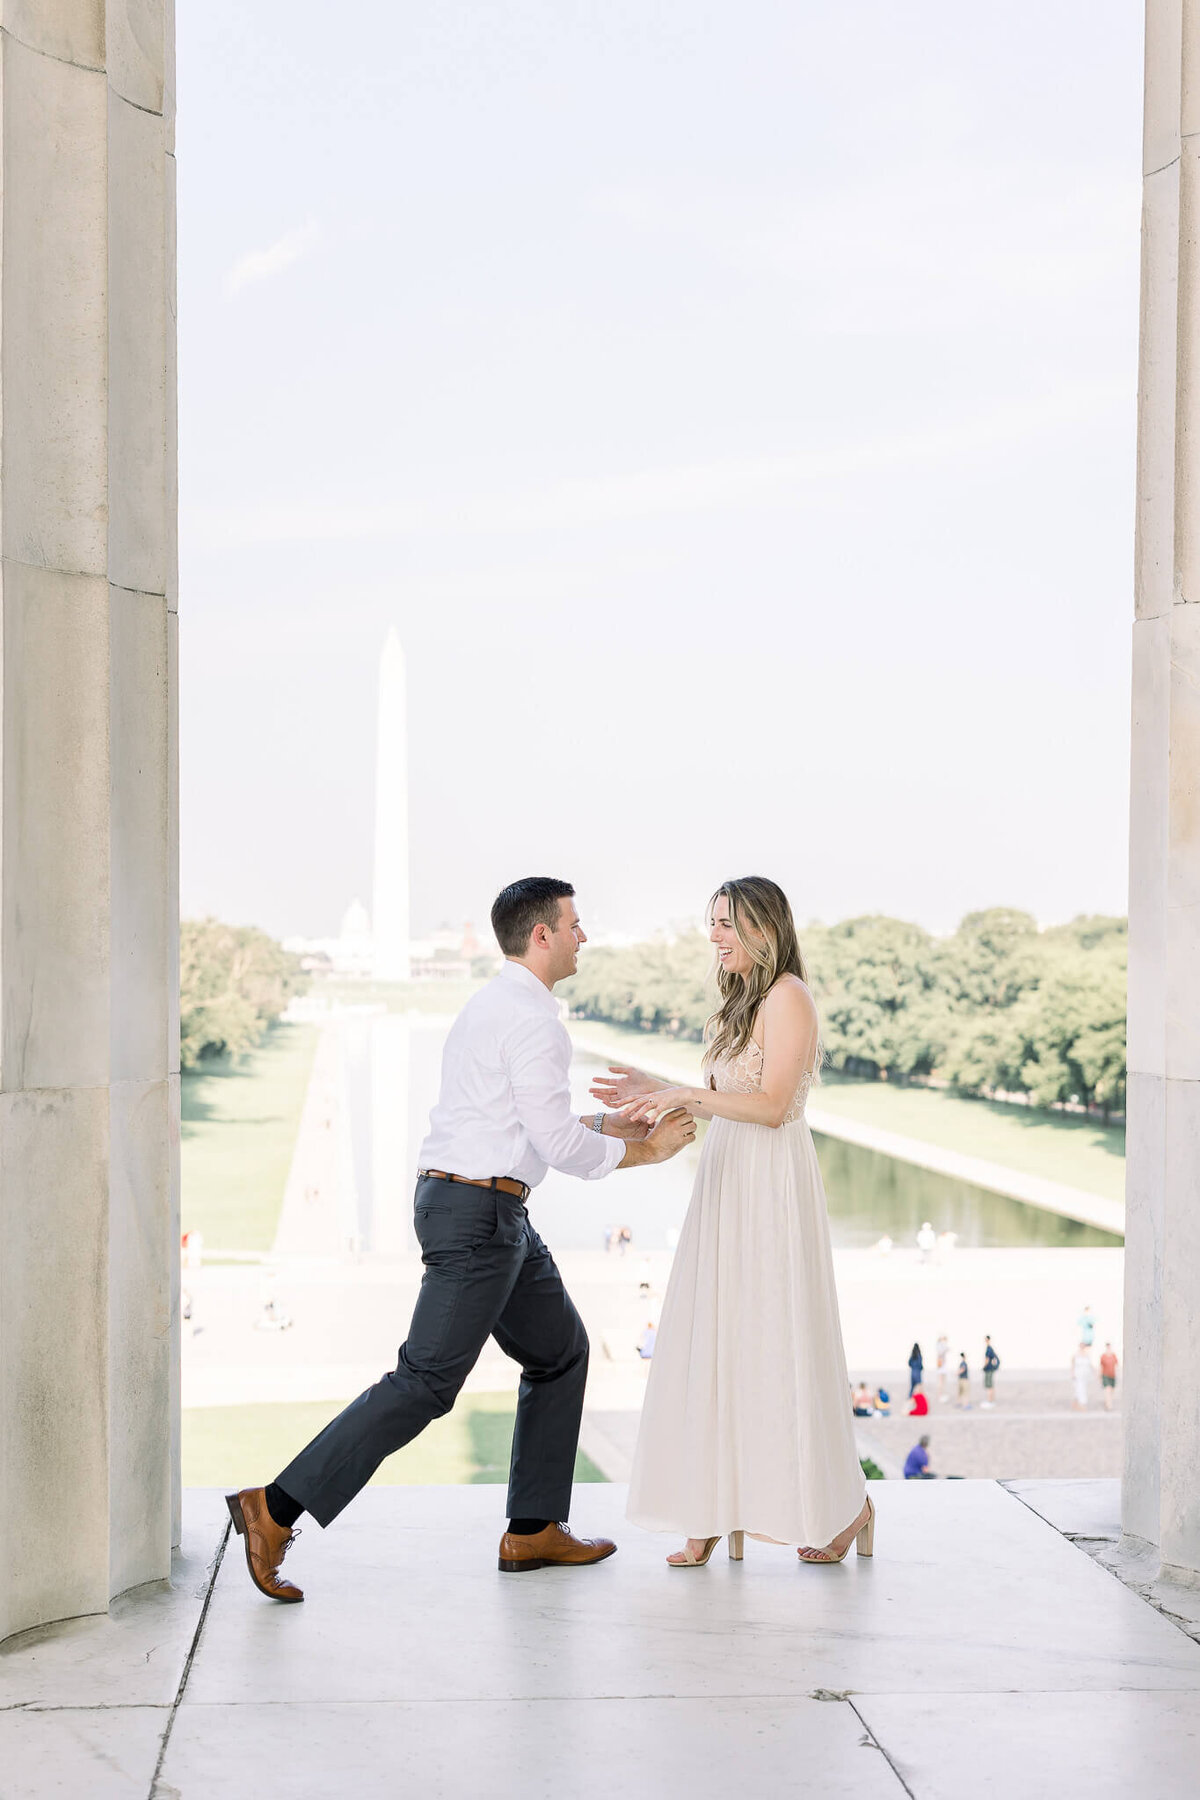 engagement-lincoln-memorial-proposal-photography-washington-DC-virginia-maryland-modern-light-and-airy-classic-timeless-romantic-11